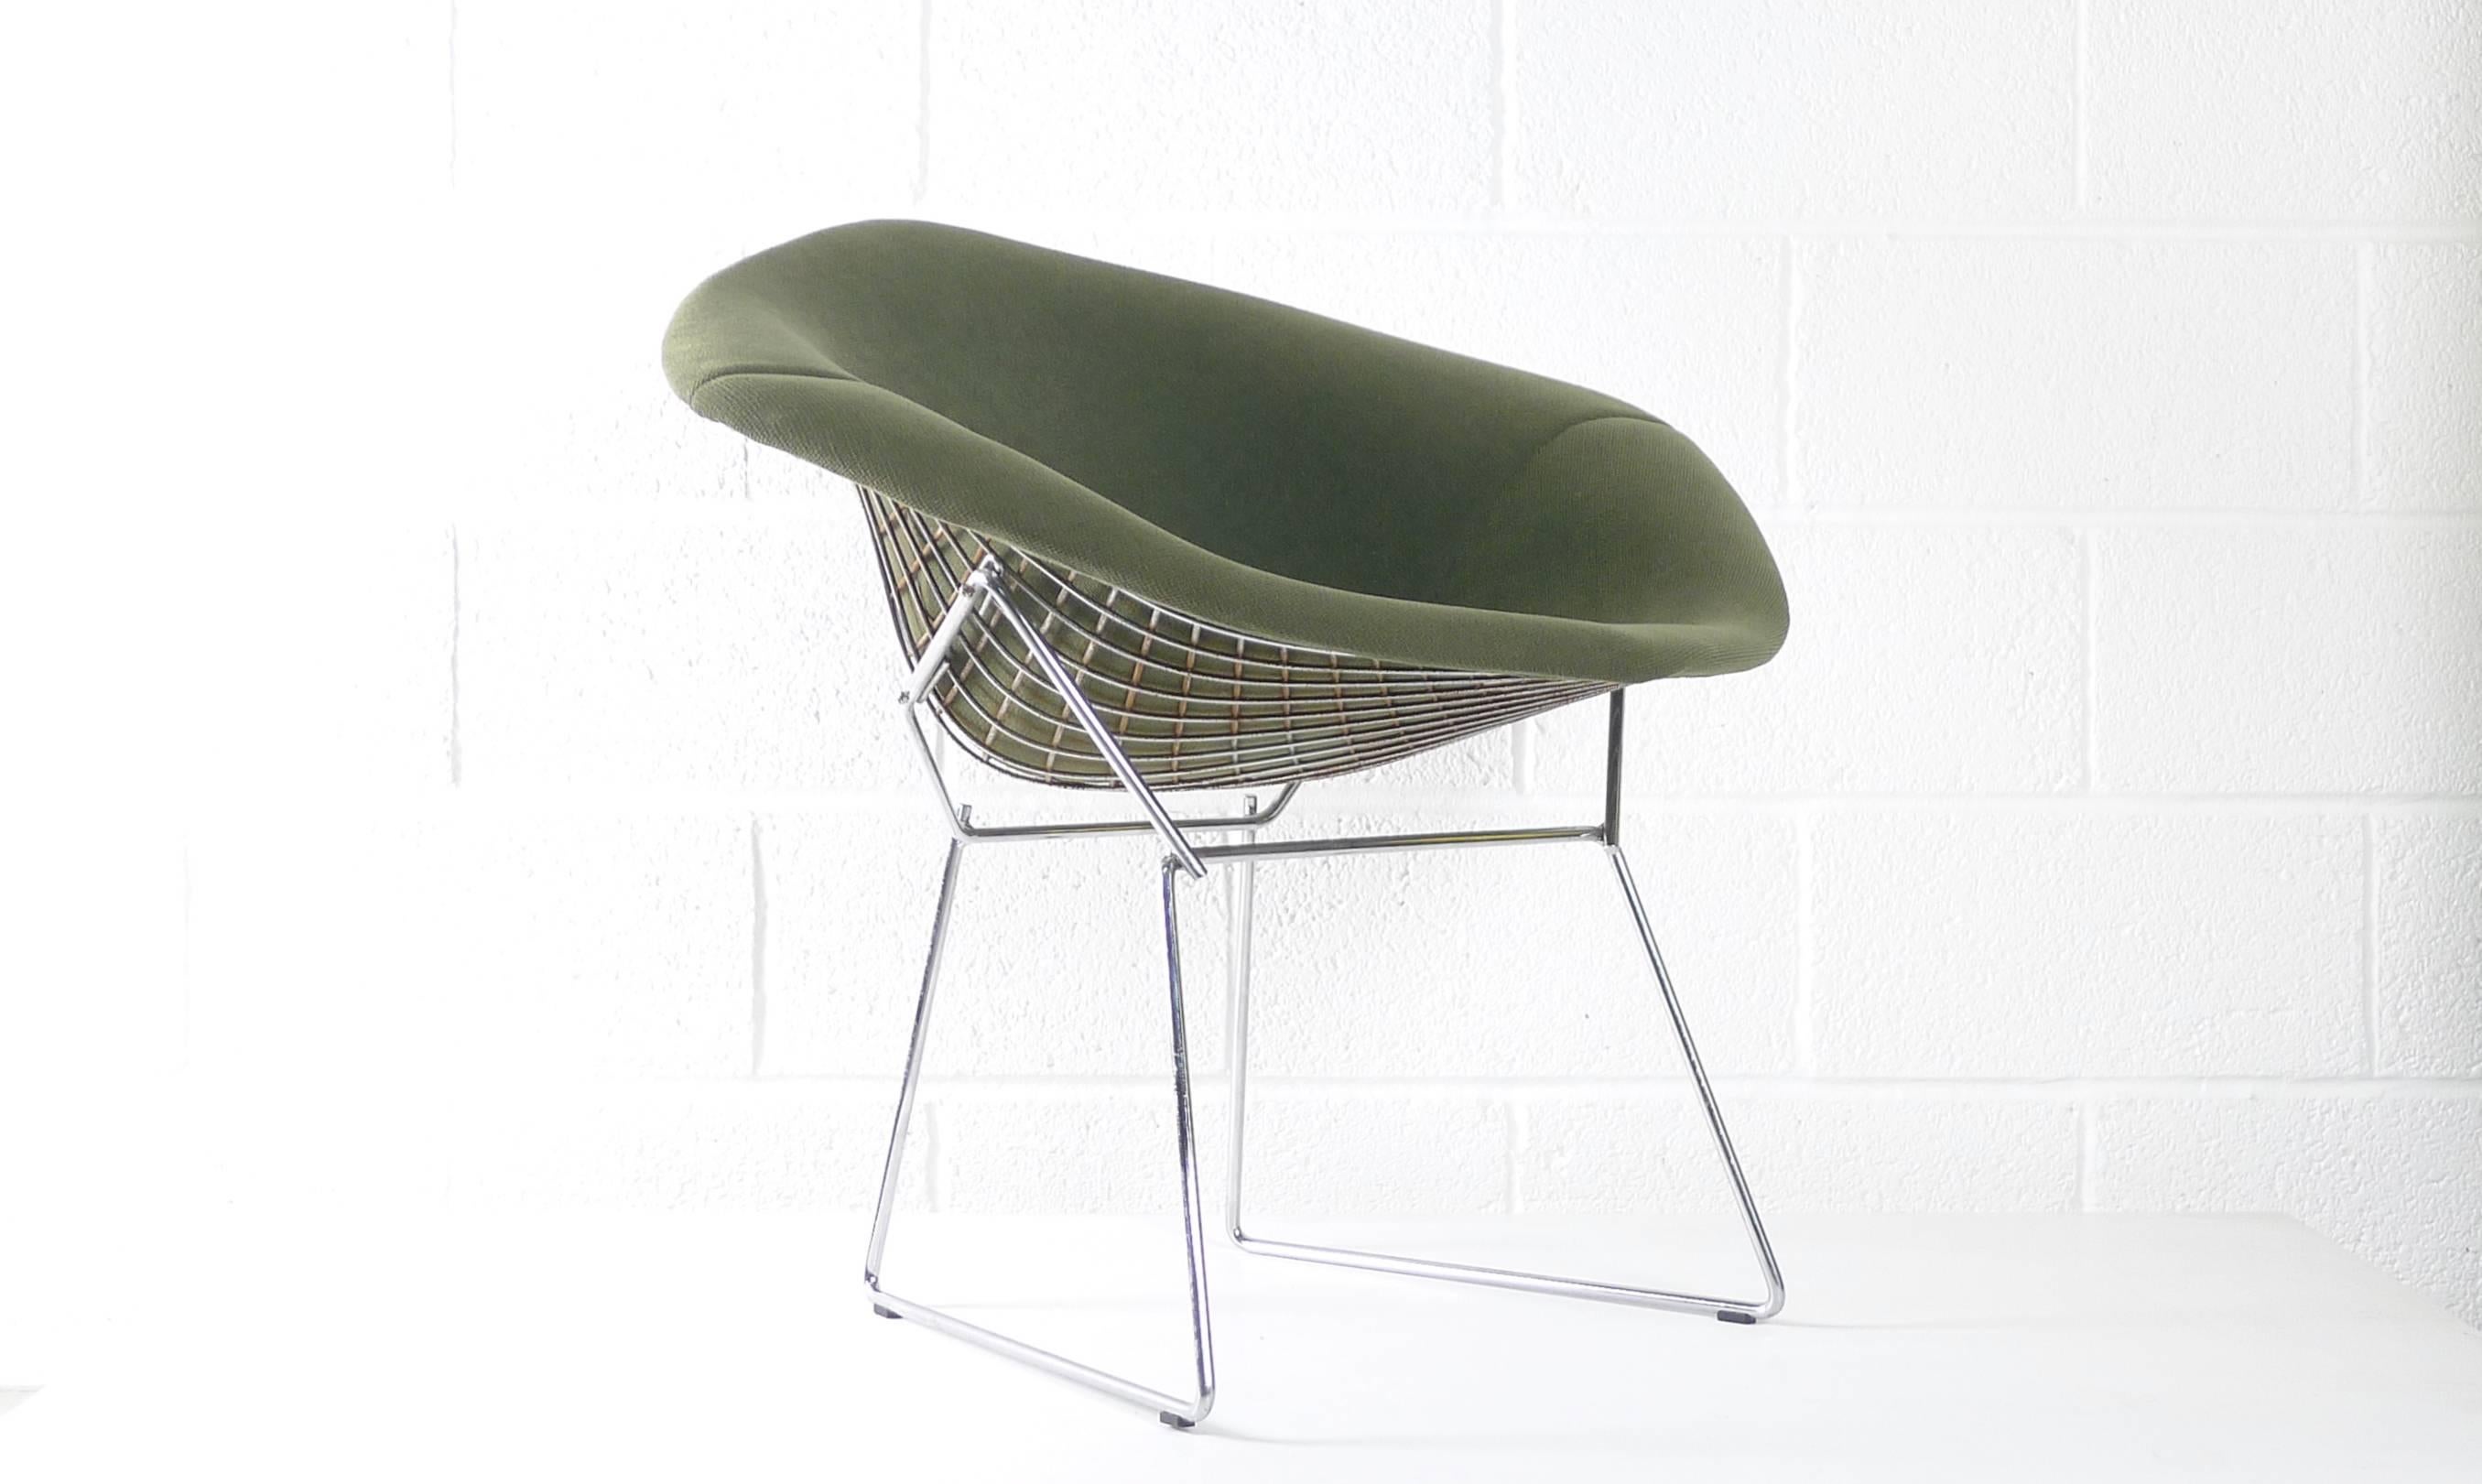 Harry Bertoia for Knoll International, 1960s, chromed steel frames supporting upholstered seat cushion. Knoll labels to underside. Available in in green and red as shown, also slate blue. Several of each available. Genuine examples manufactured in